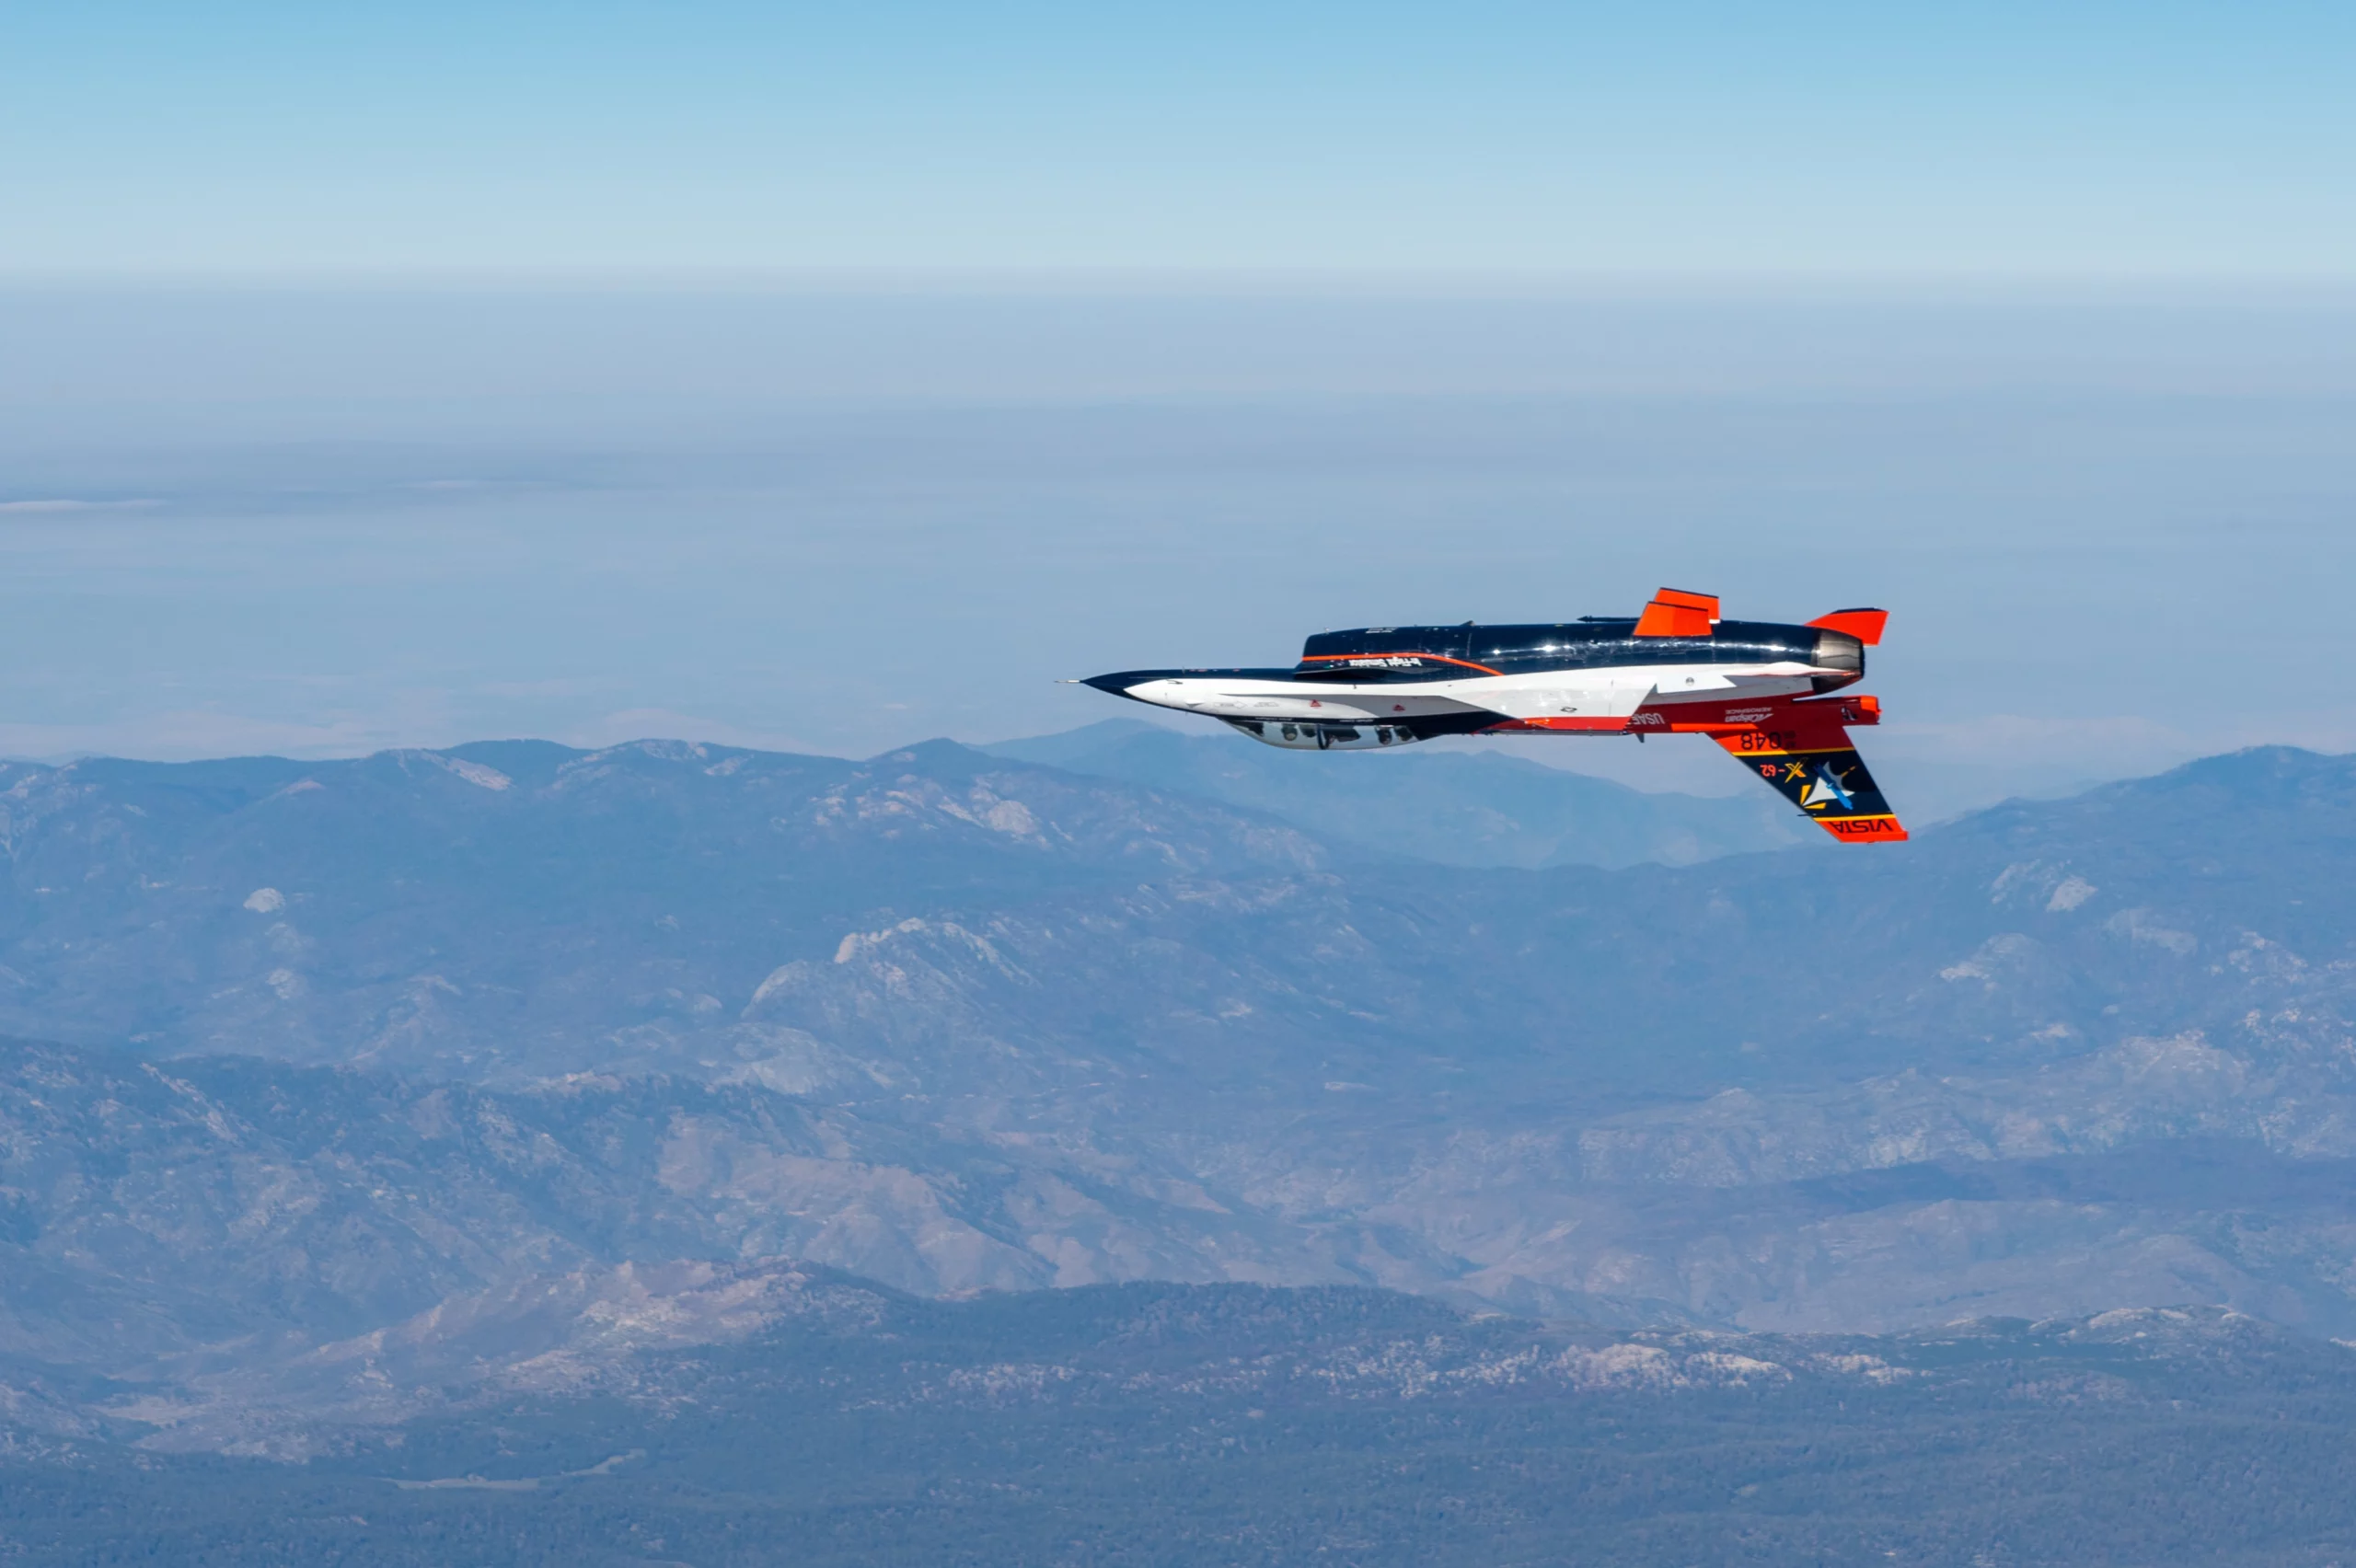 DARPA’s Groundbreaking “ACE” Program and X-62A Becomes First AI-Controlled Jet to Dogfight Against Manned F-16 in Real-World